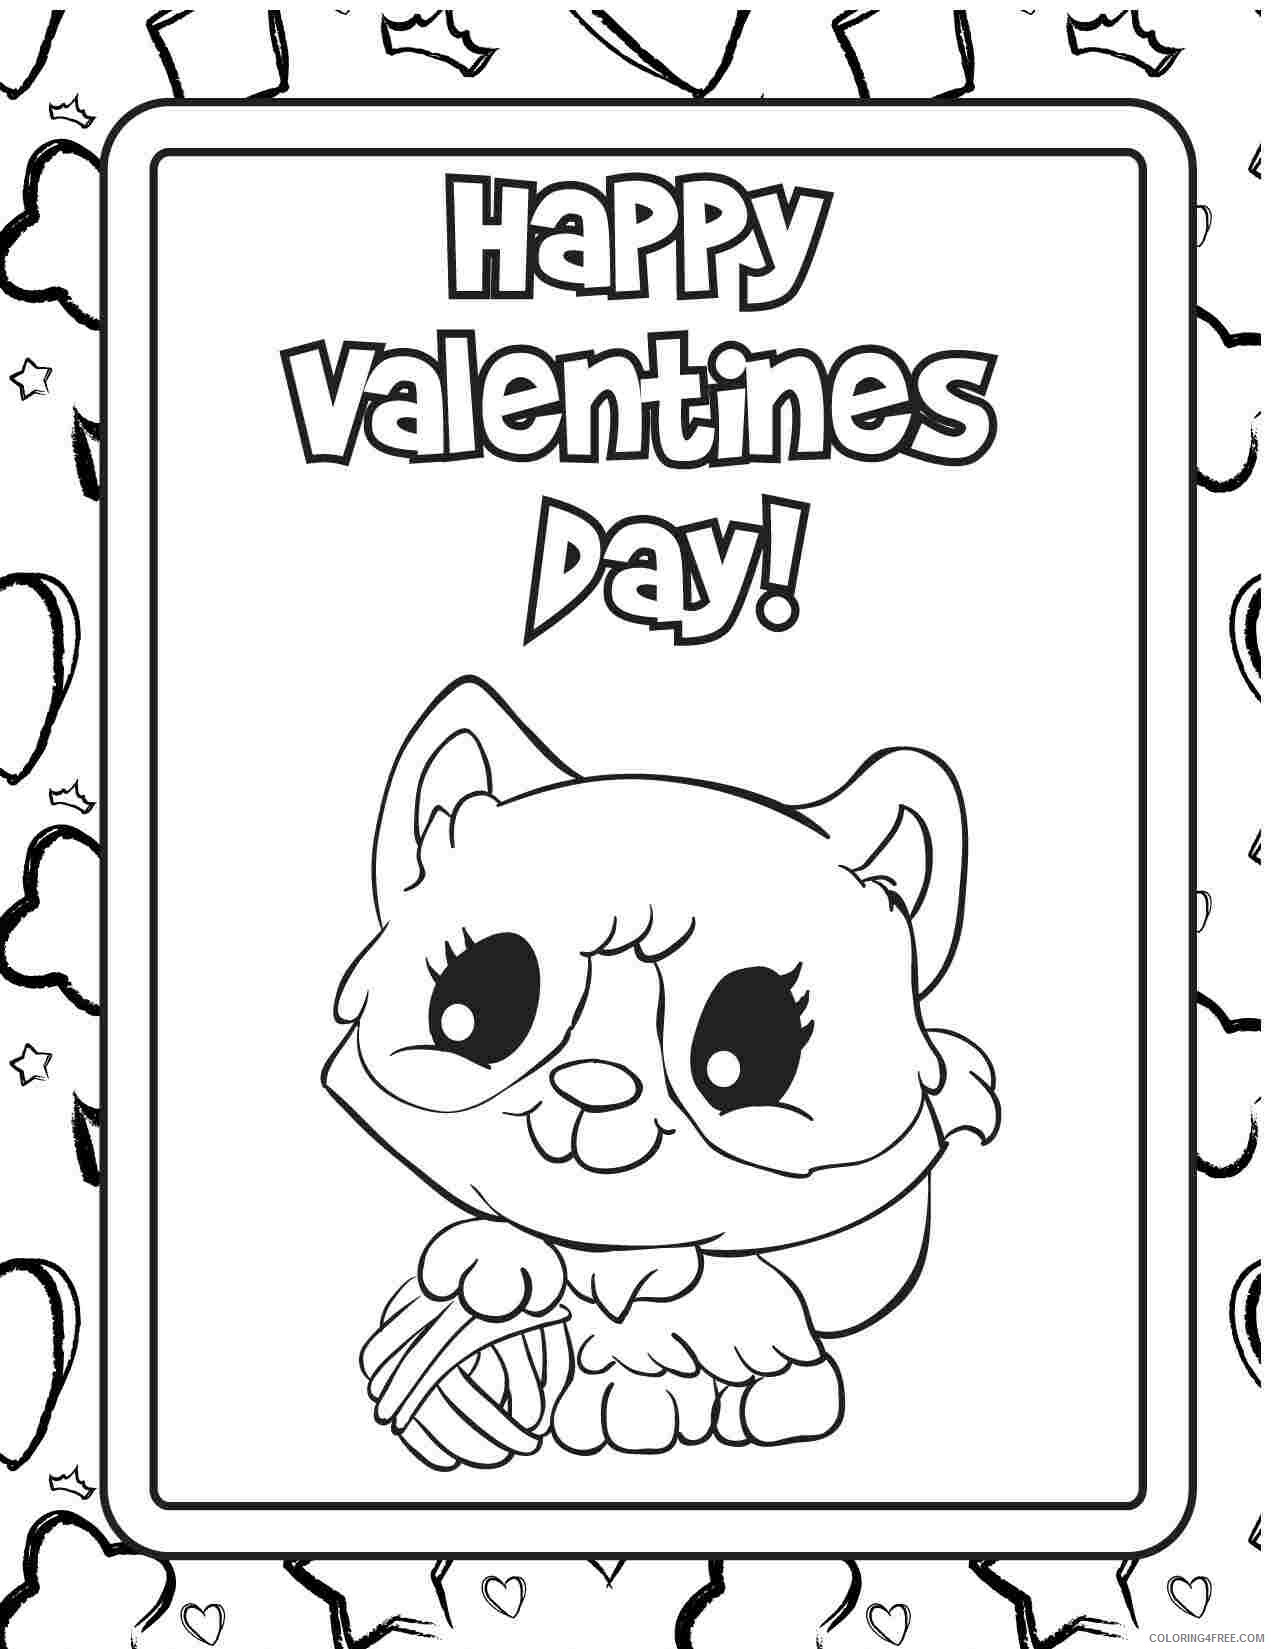 Valentines Day Coloring Pages Holiday Happy Valentines Day Card Printable 2021 0974 Coloring4free